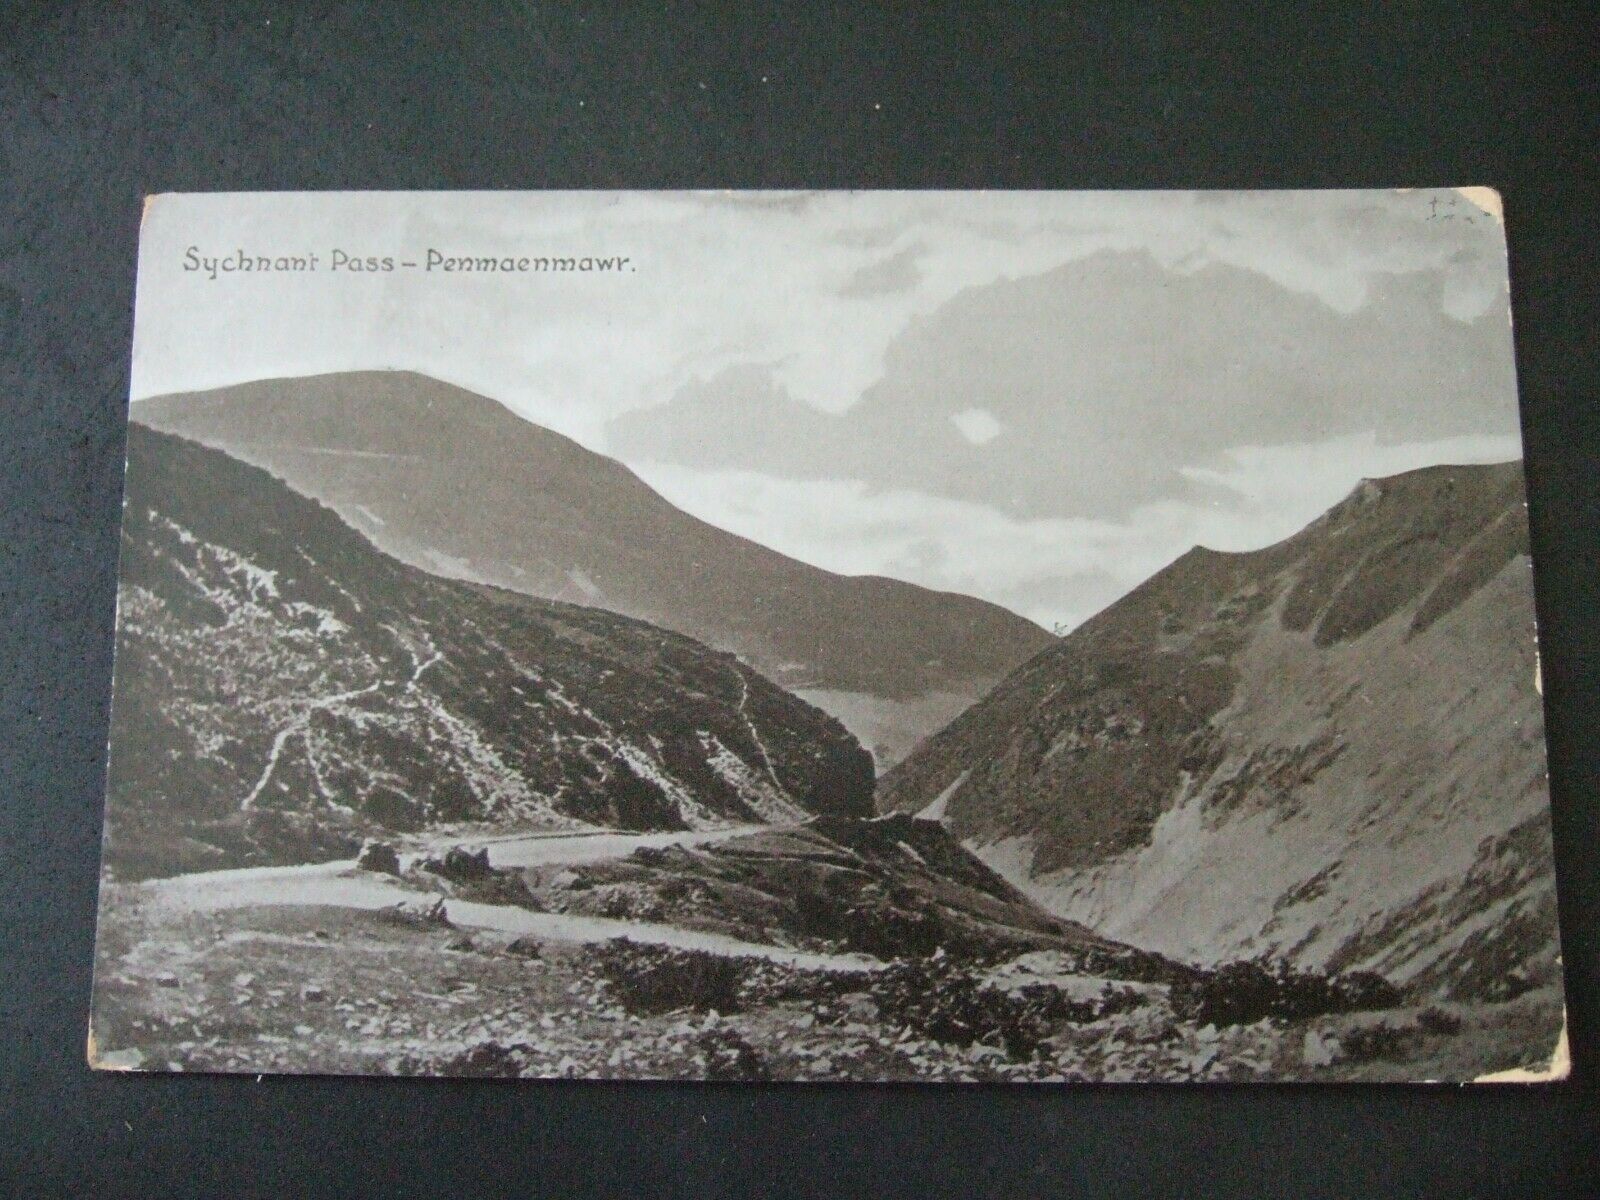 House Clearance - Service. Sychnant Pass-Penmaenmawr. Posted to an address near Keswick 1907